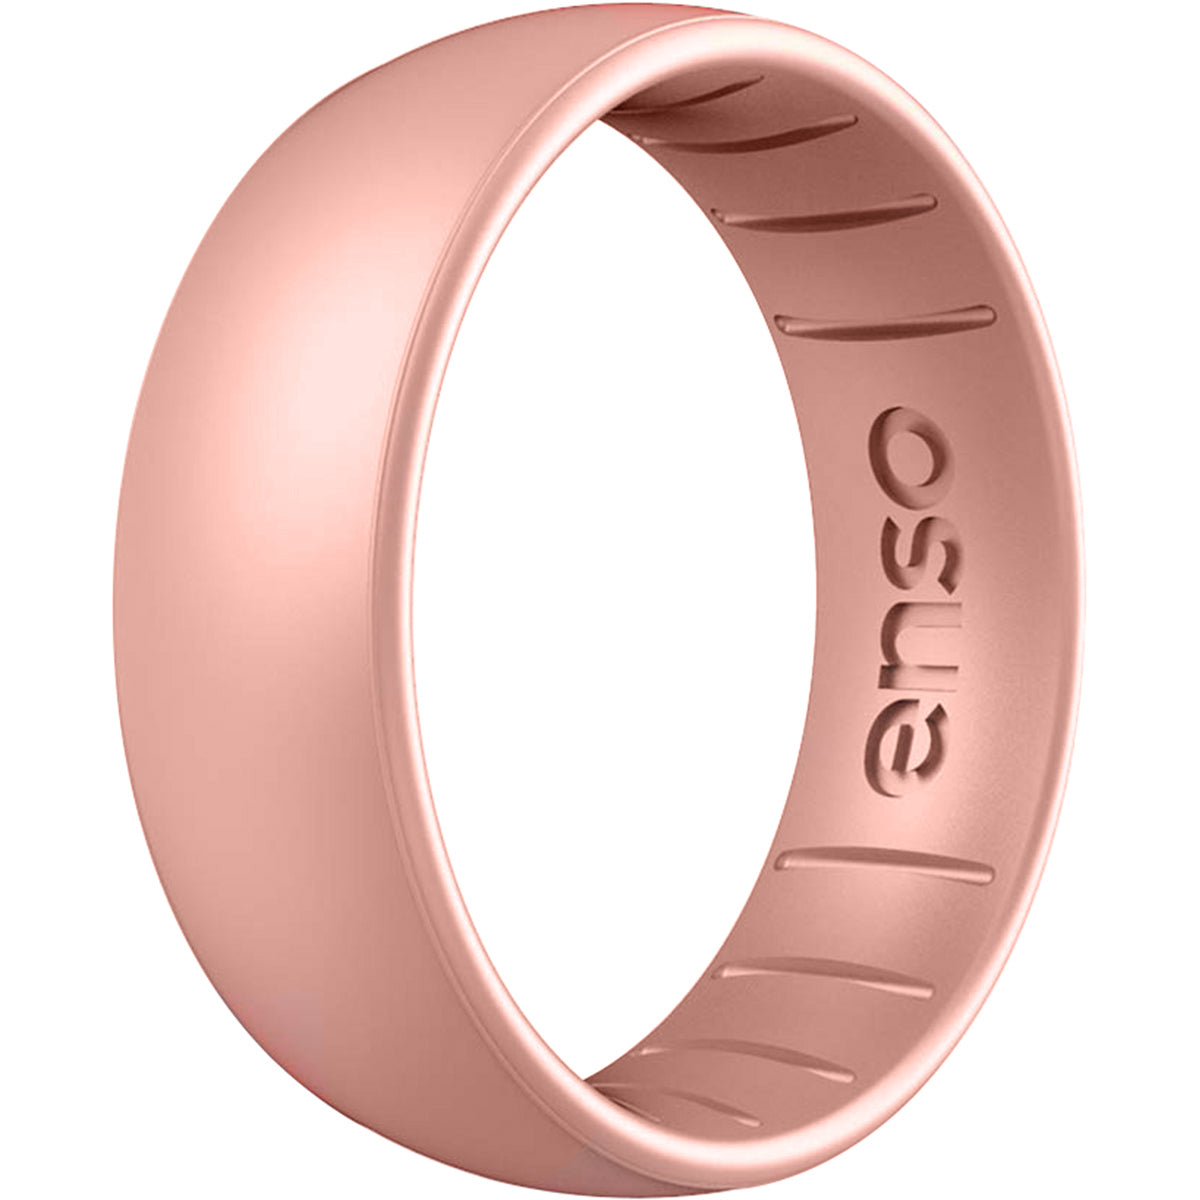 Enso Rings Classic Elements Series Silicone Ring - Rose Gold Enso Rings